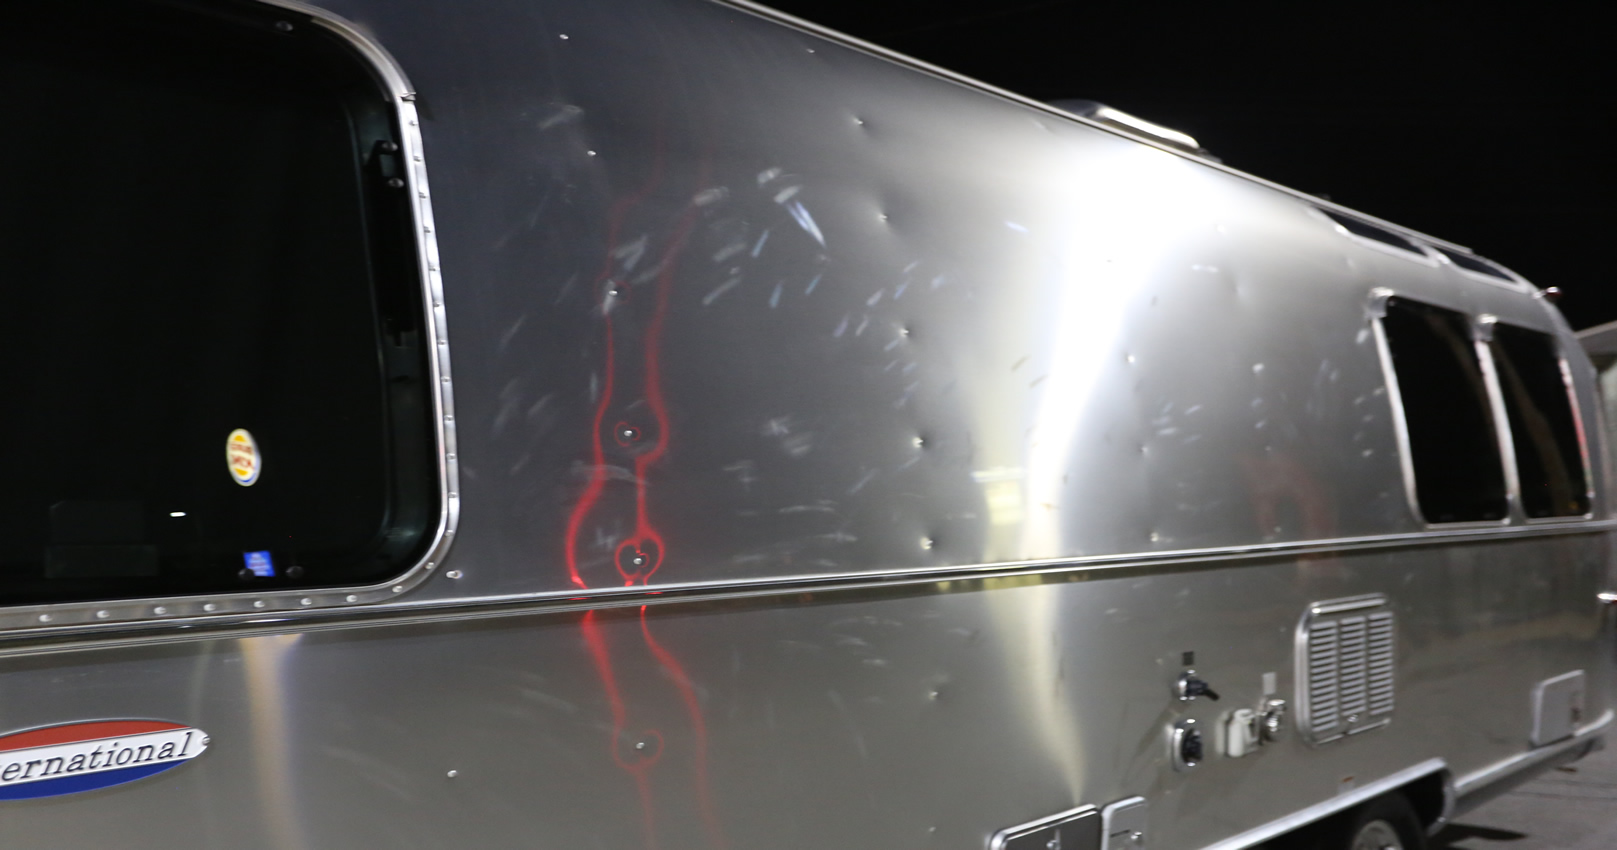 Dents are under all the sanding marks throughout the side panels. Not to be mistaken for rivets or red reflection.